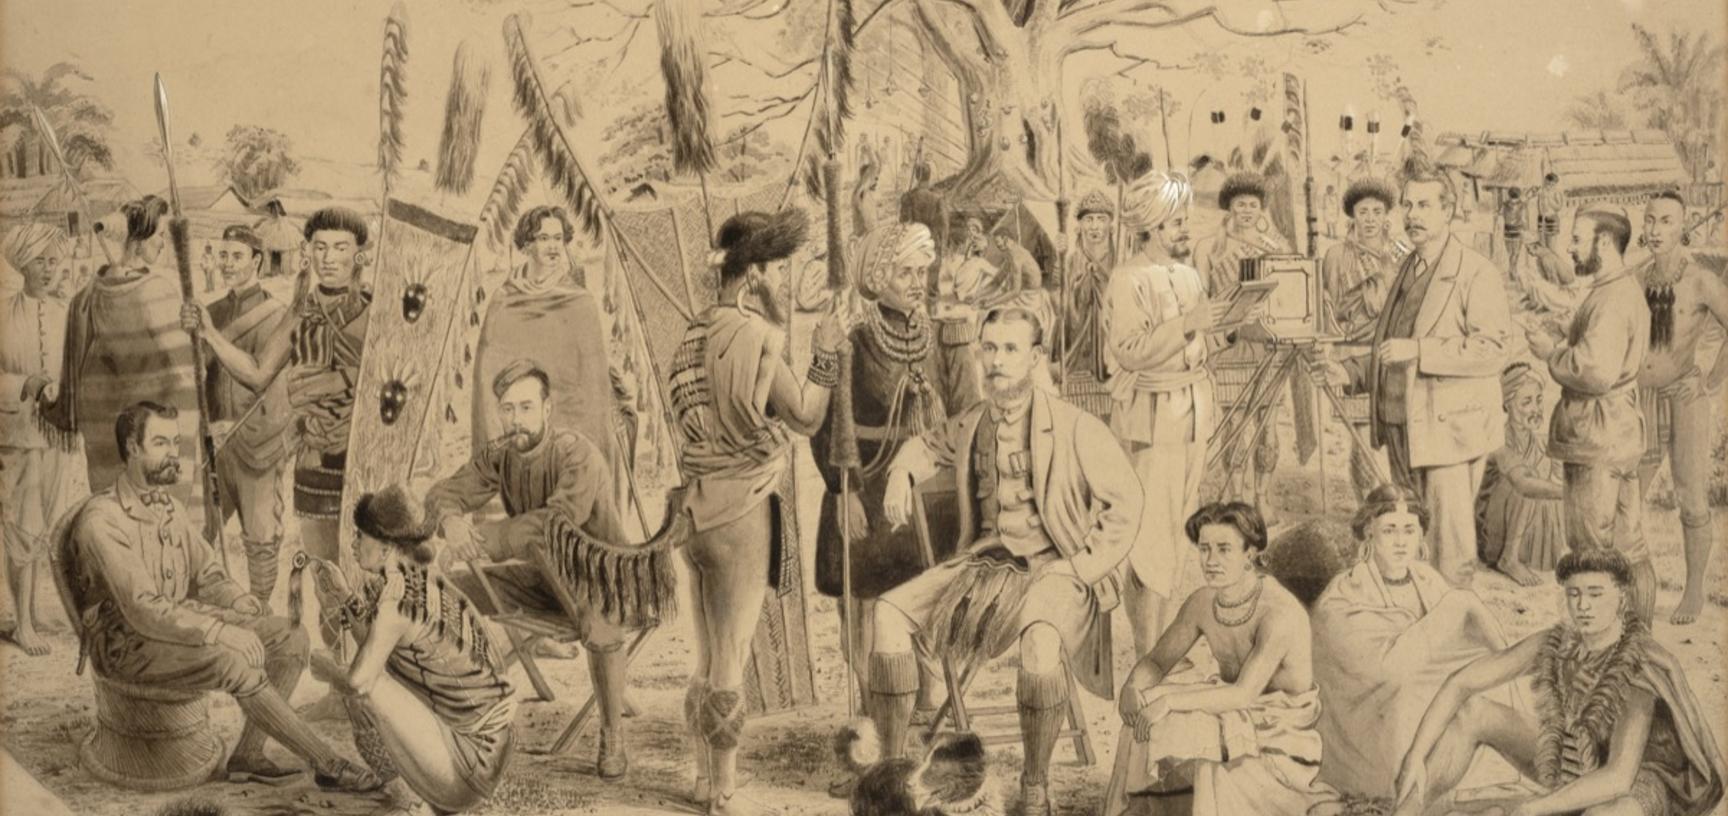 ‘Submission of Naga Chiefs’ painting showing at its centre Captain John Butler, the British administrator in charge of the Naga Hills District.